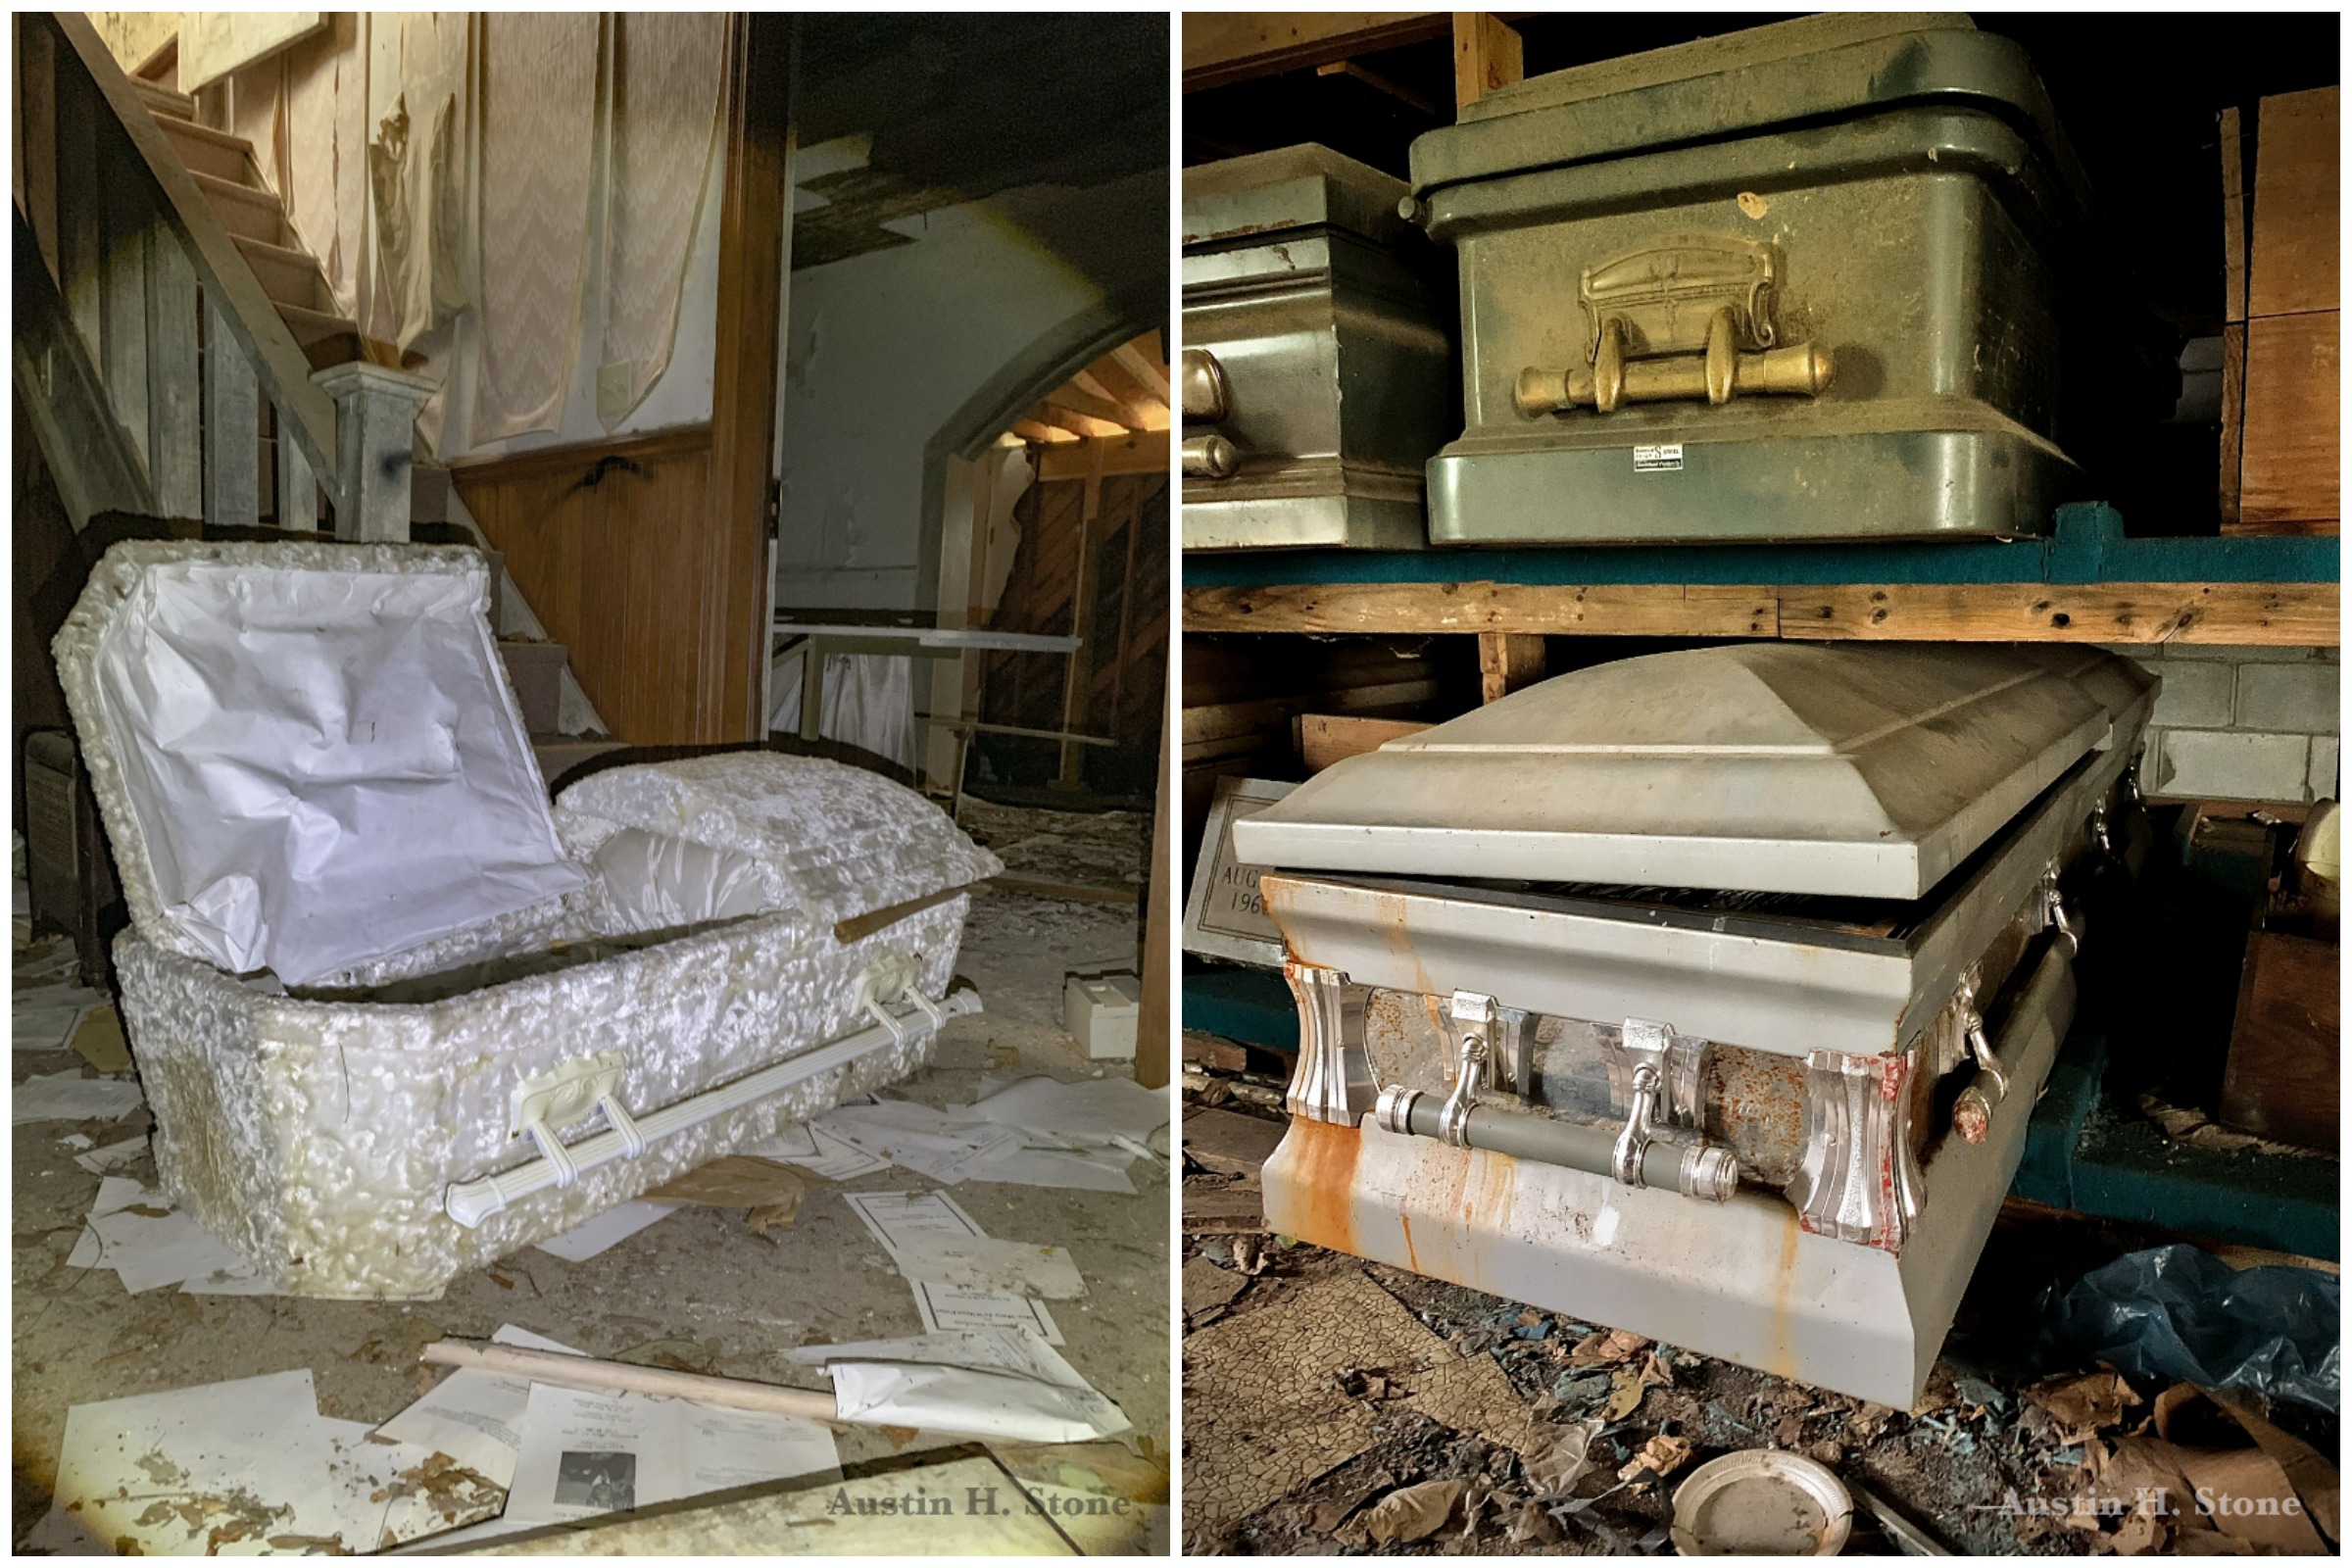 Man Explores 'Eerie' Abandoned Funeral Home With Children's Caskets Inside